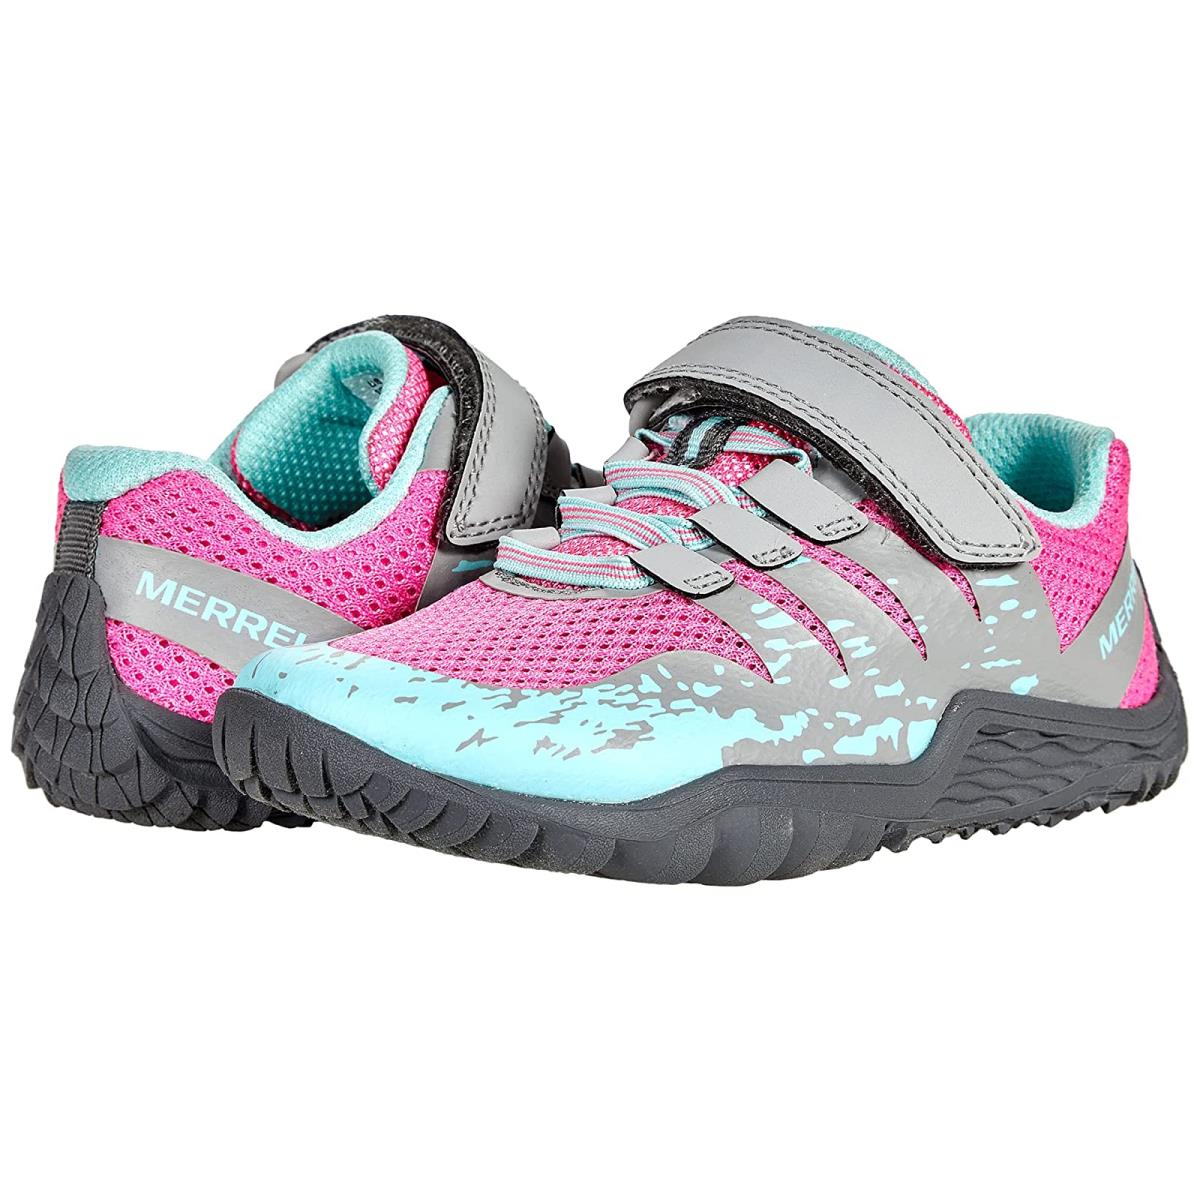 Girl`s Shoes Merrell Kids Trail Glove 5 A/c Toddler/little Kid/big Kid Grey/Hot Pink/Turquoise